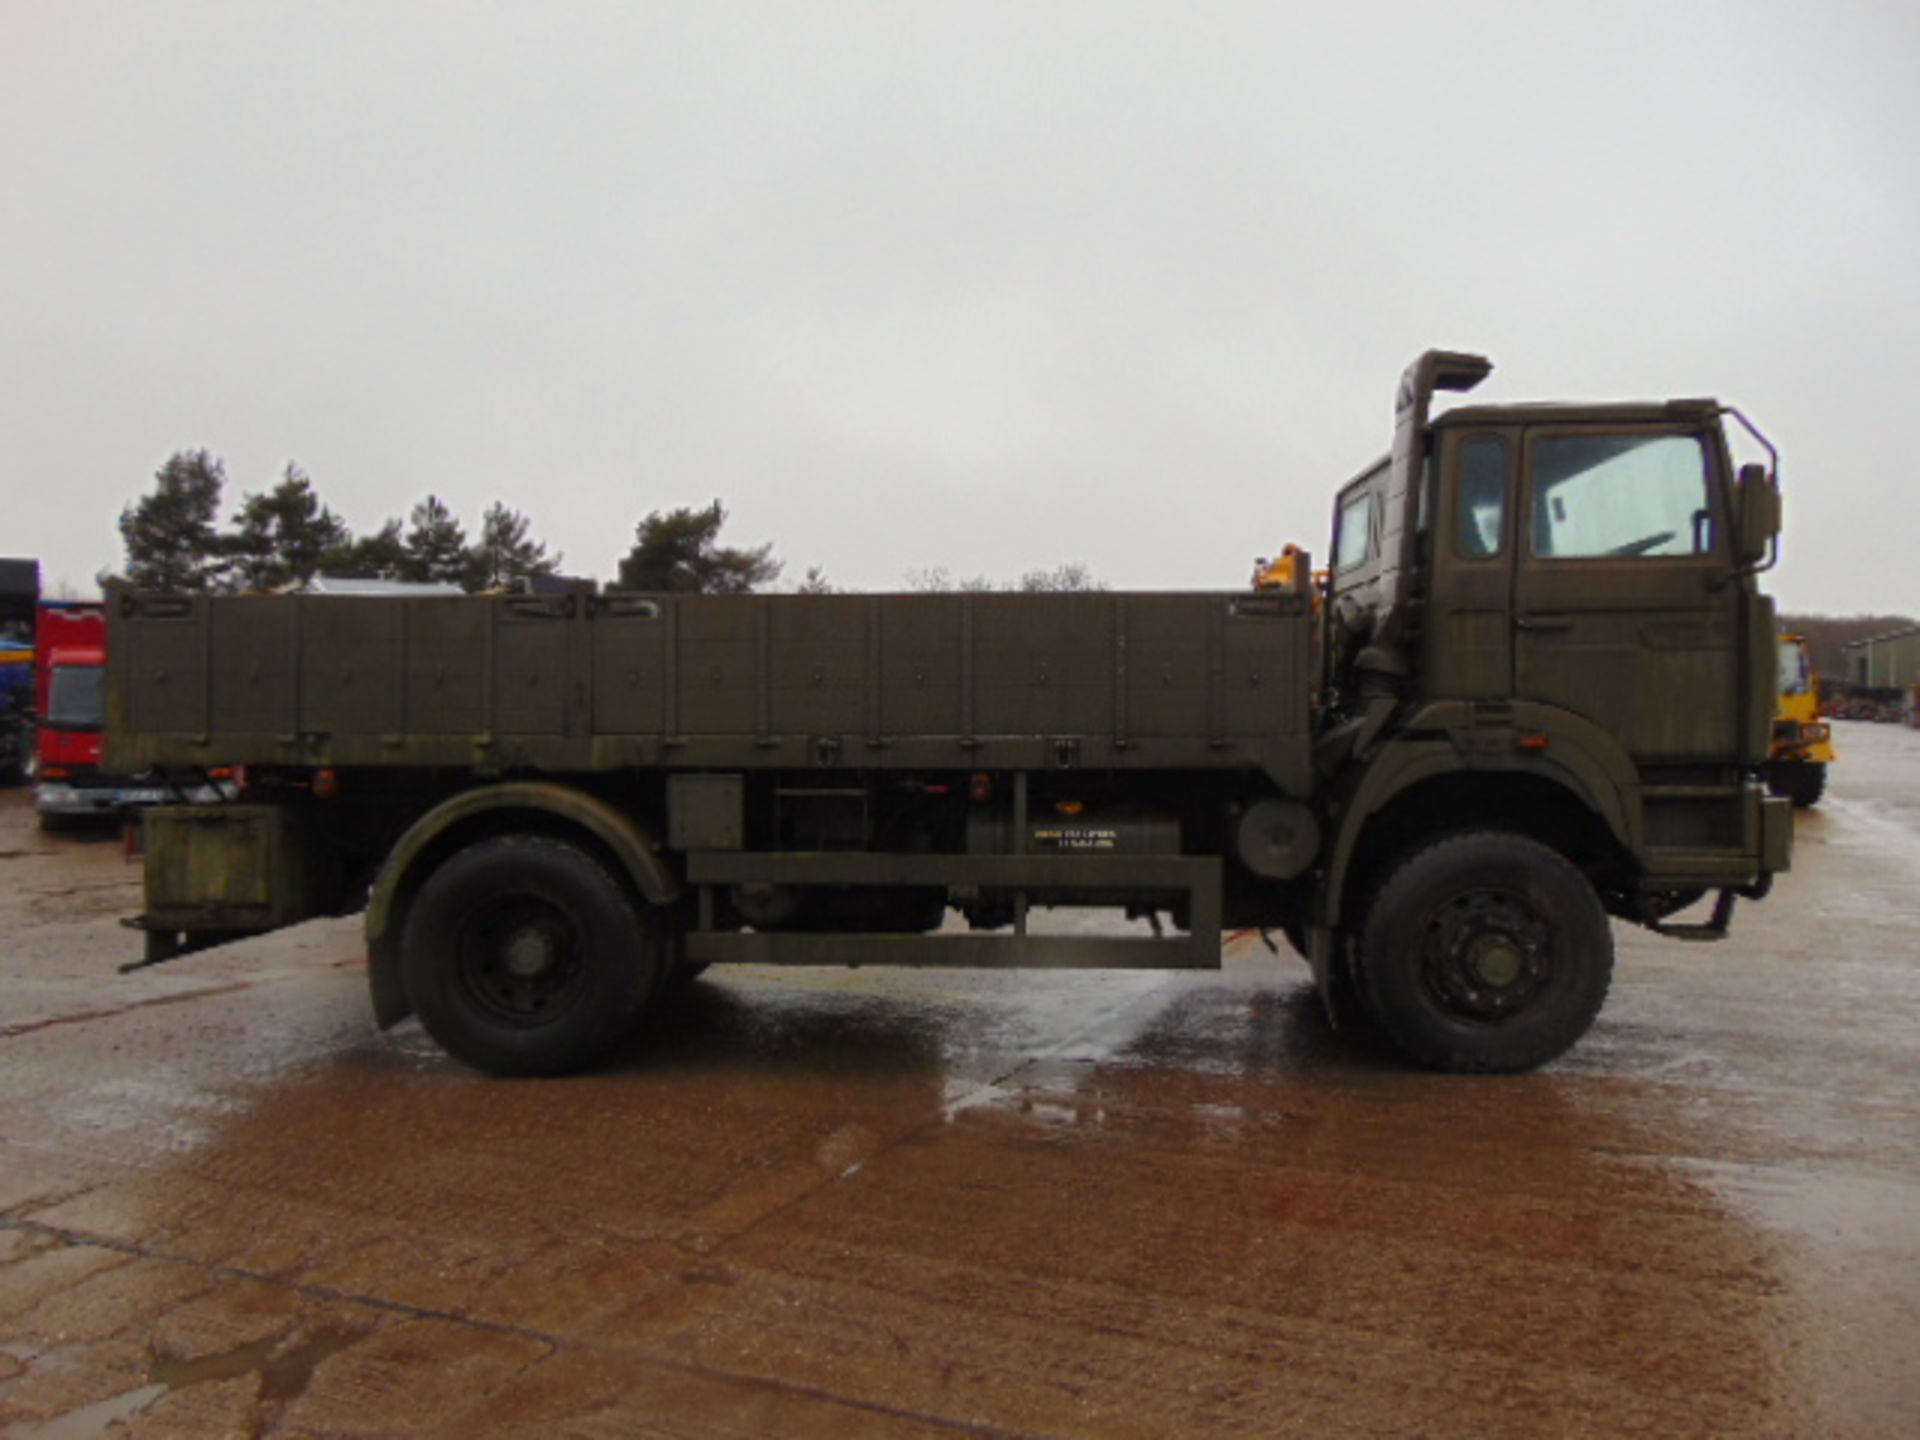 Renault G300 Maxter RHD 4x4 8T Cargo Truck with Fitted Winch - Image 8 of 17